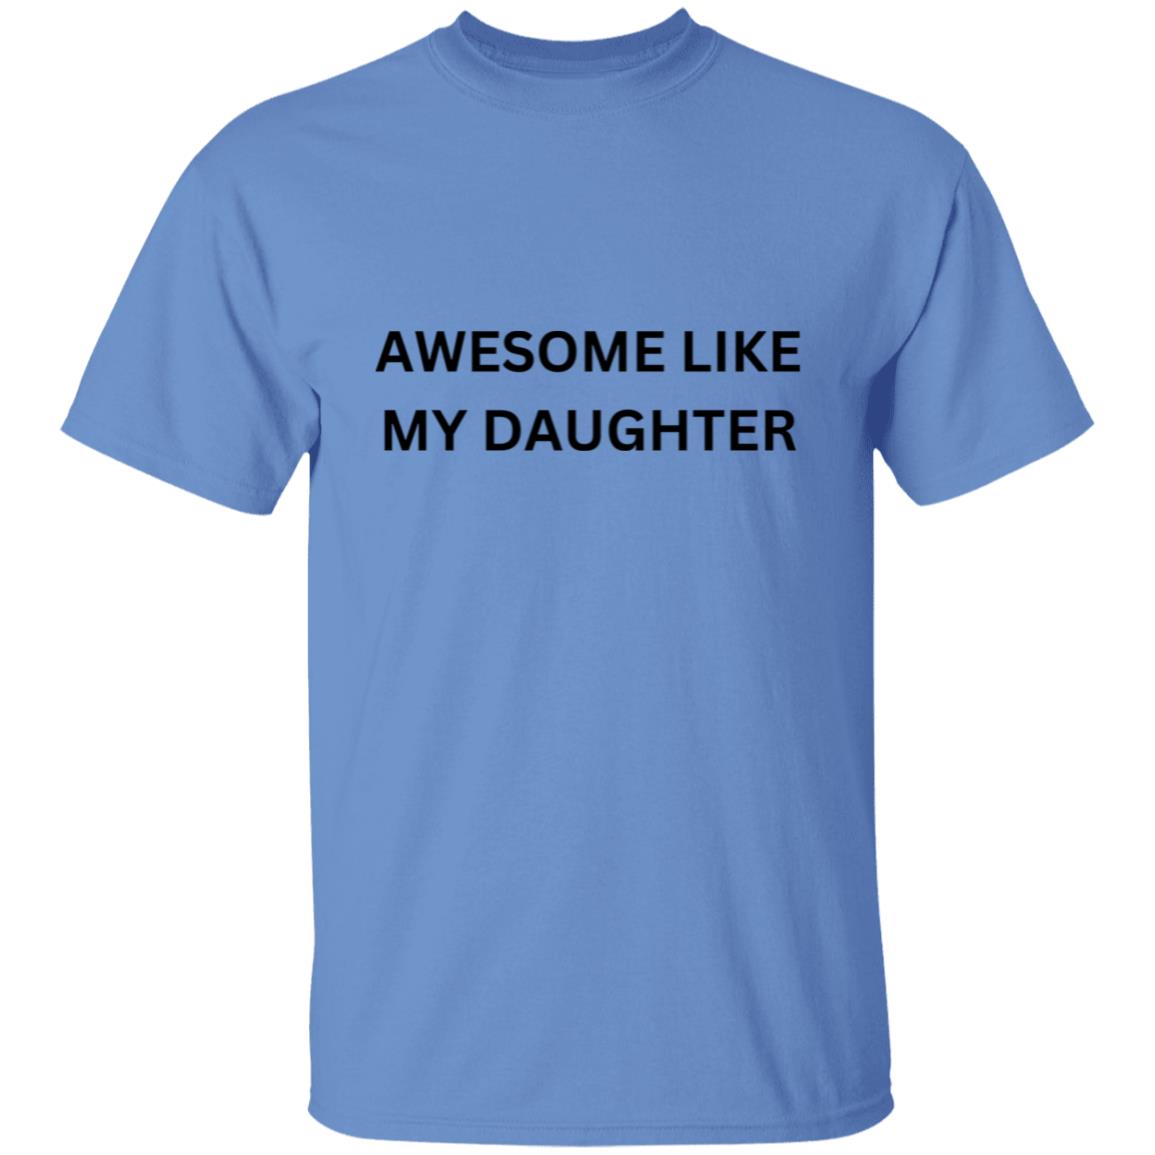 Get trendy with Awesome Like My Daughter T-Shirt - T-Shirts available at Good Gift Company. Grab yours for $15.99 today!